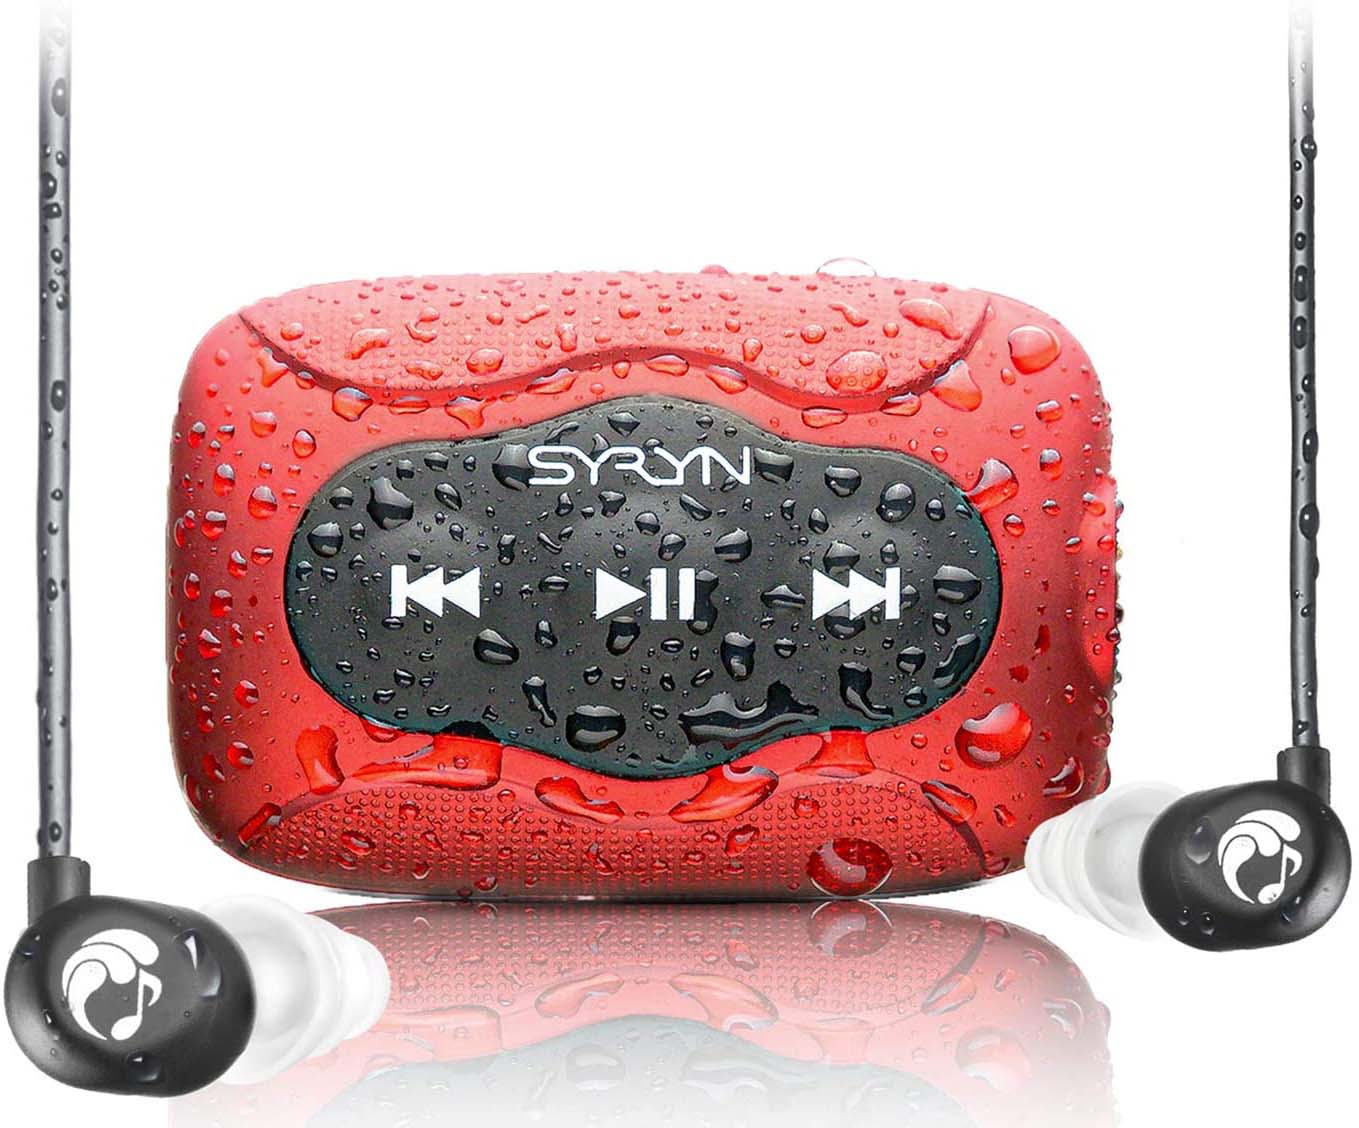 
Waterproof MP3 player: A swimmers guide and review
